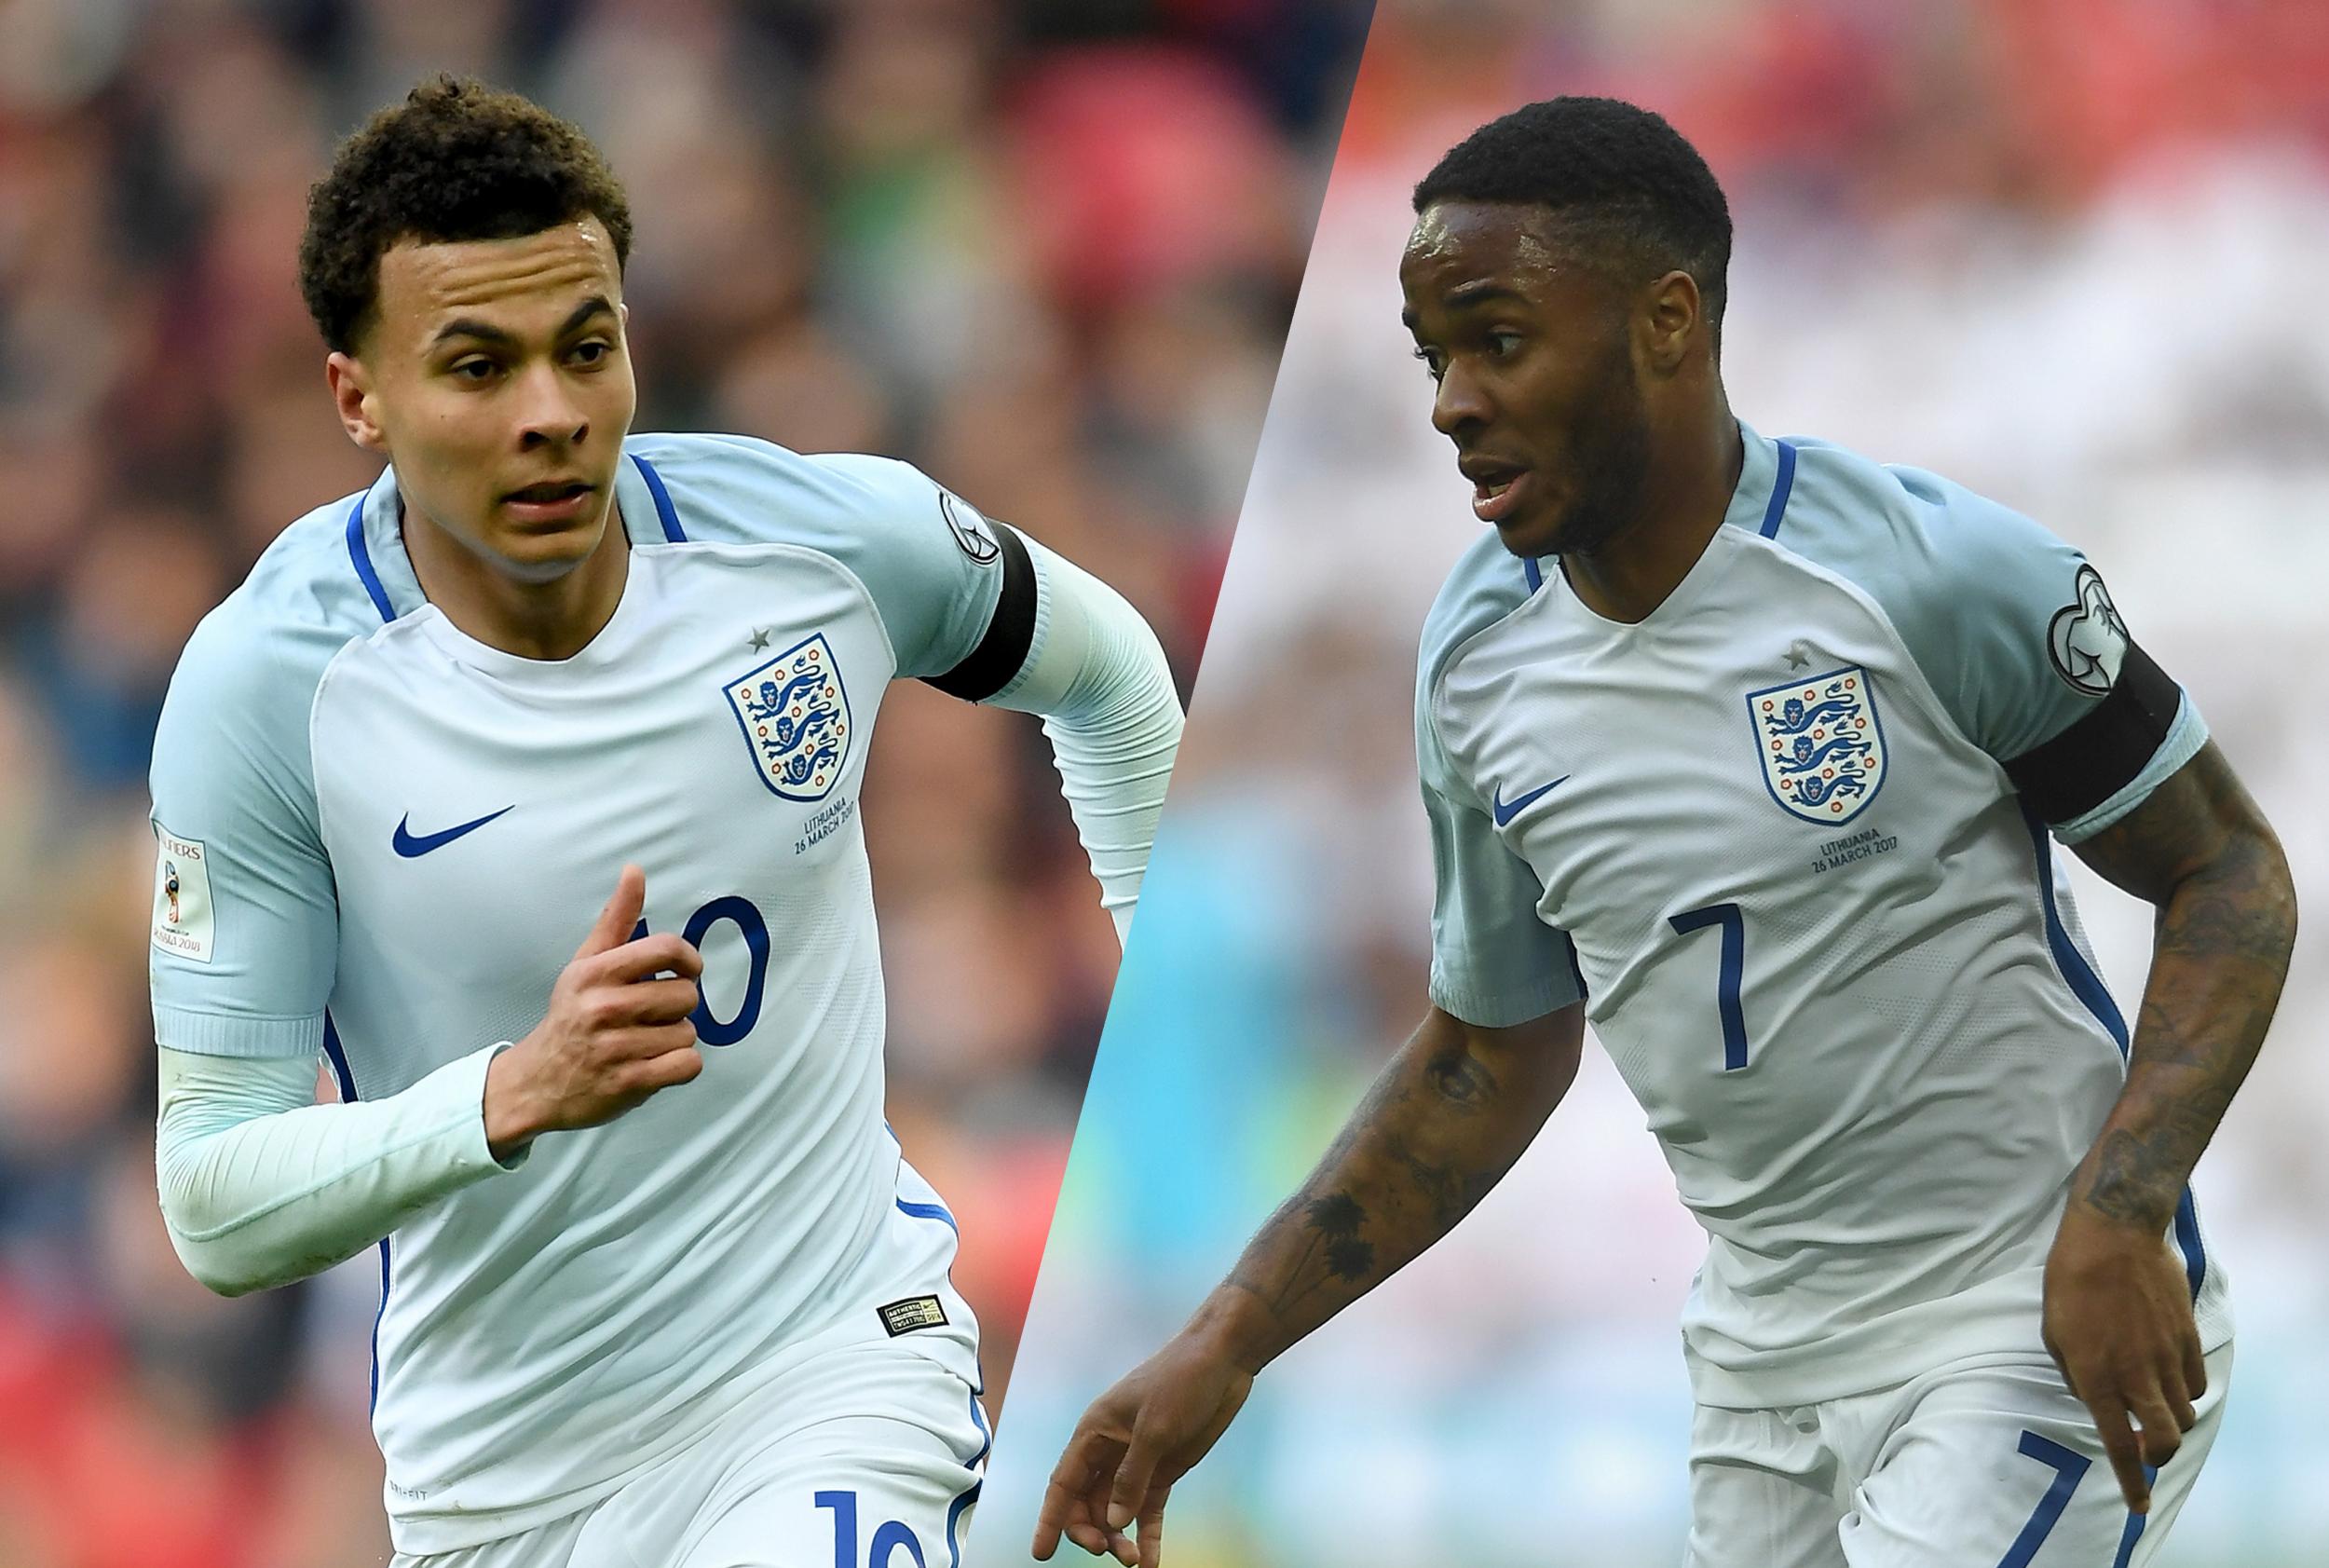 Dele Alli and Raheem Sterling will both be world class players by 2020